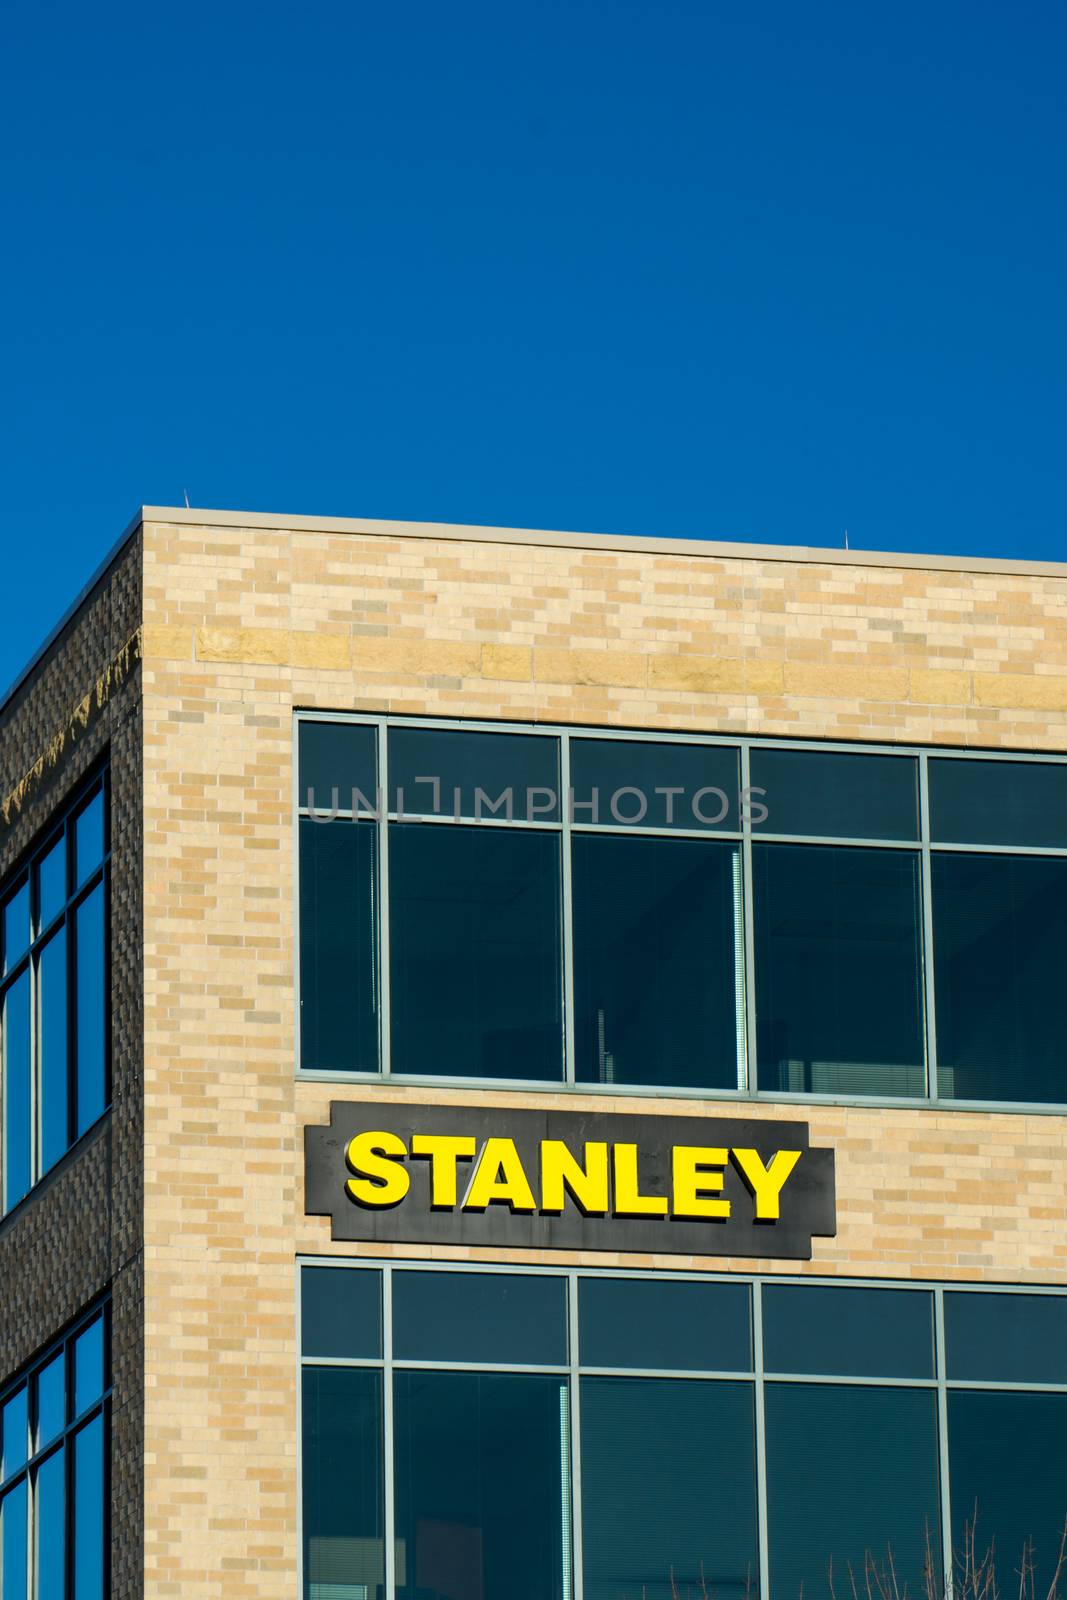 MAPLE GROVE, MN/USA - JANUARY 18, 2015: Stanley corporate headquarters and sign. Stanley Hand Tools is a brand of hand tools and a division of Stanley Black and Decker.